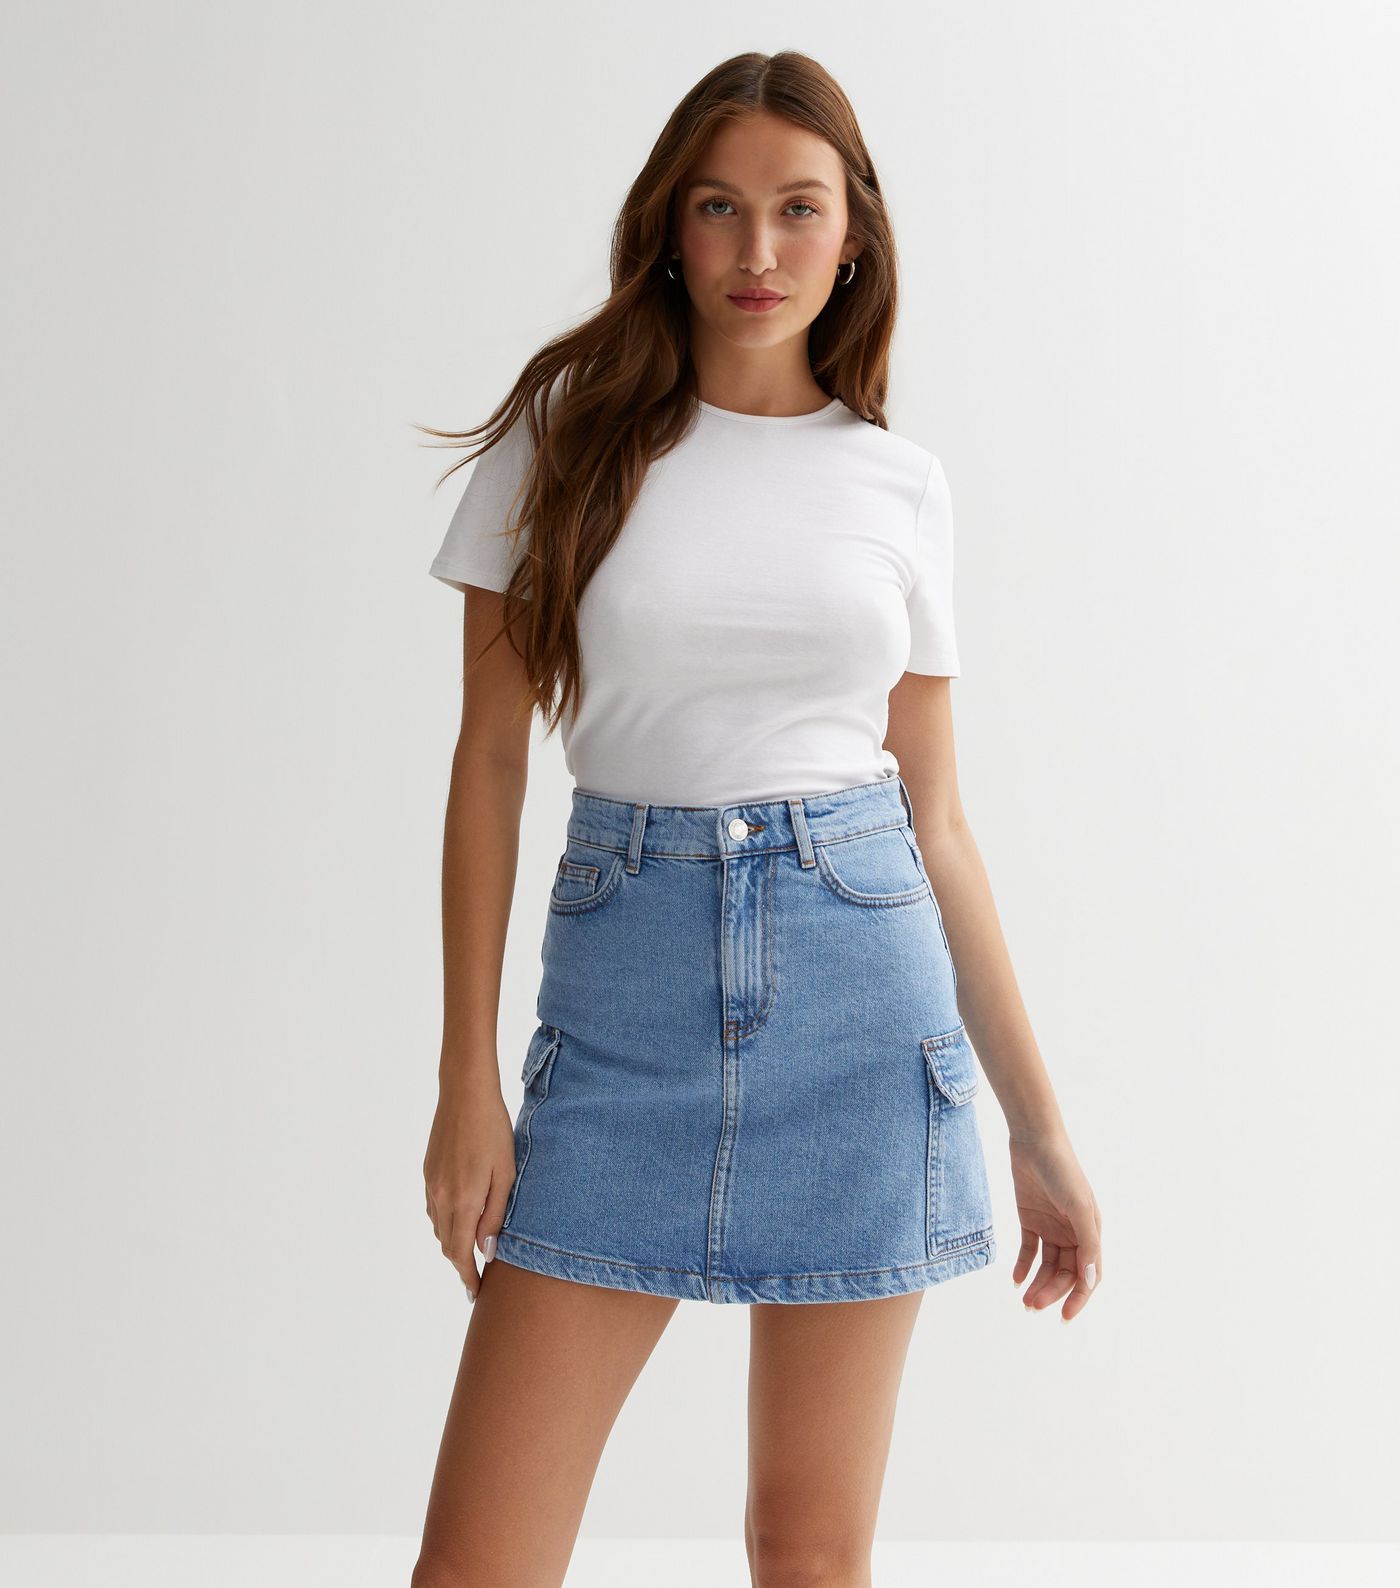 Blue Denim Cargo Mini Skirt
						
						Add to Saved Items
						Remove from Saved Items | New Look (UK)